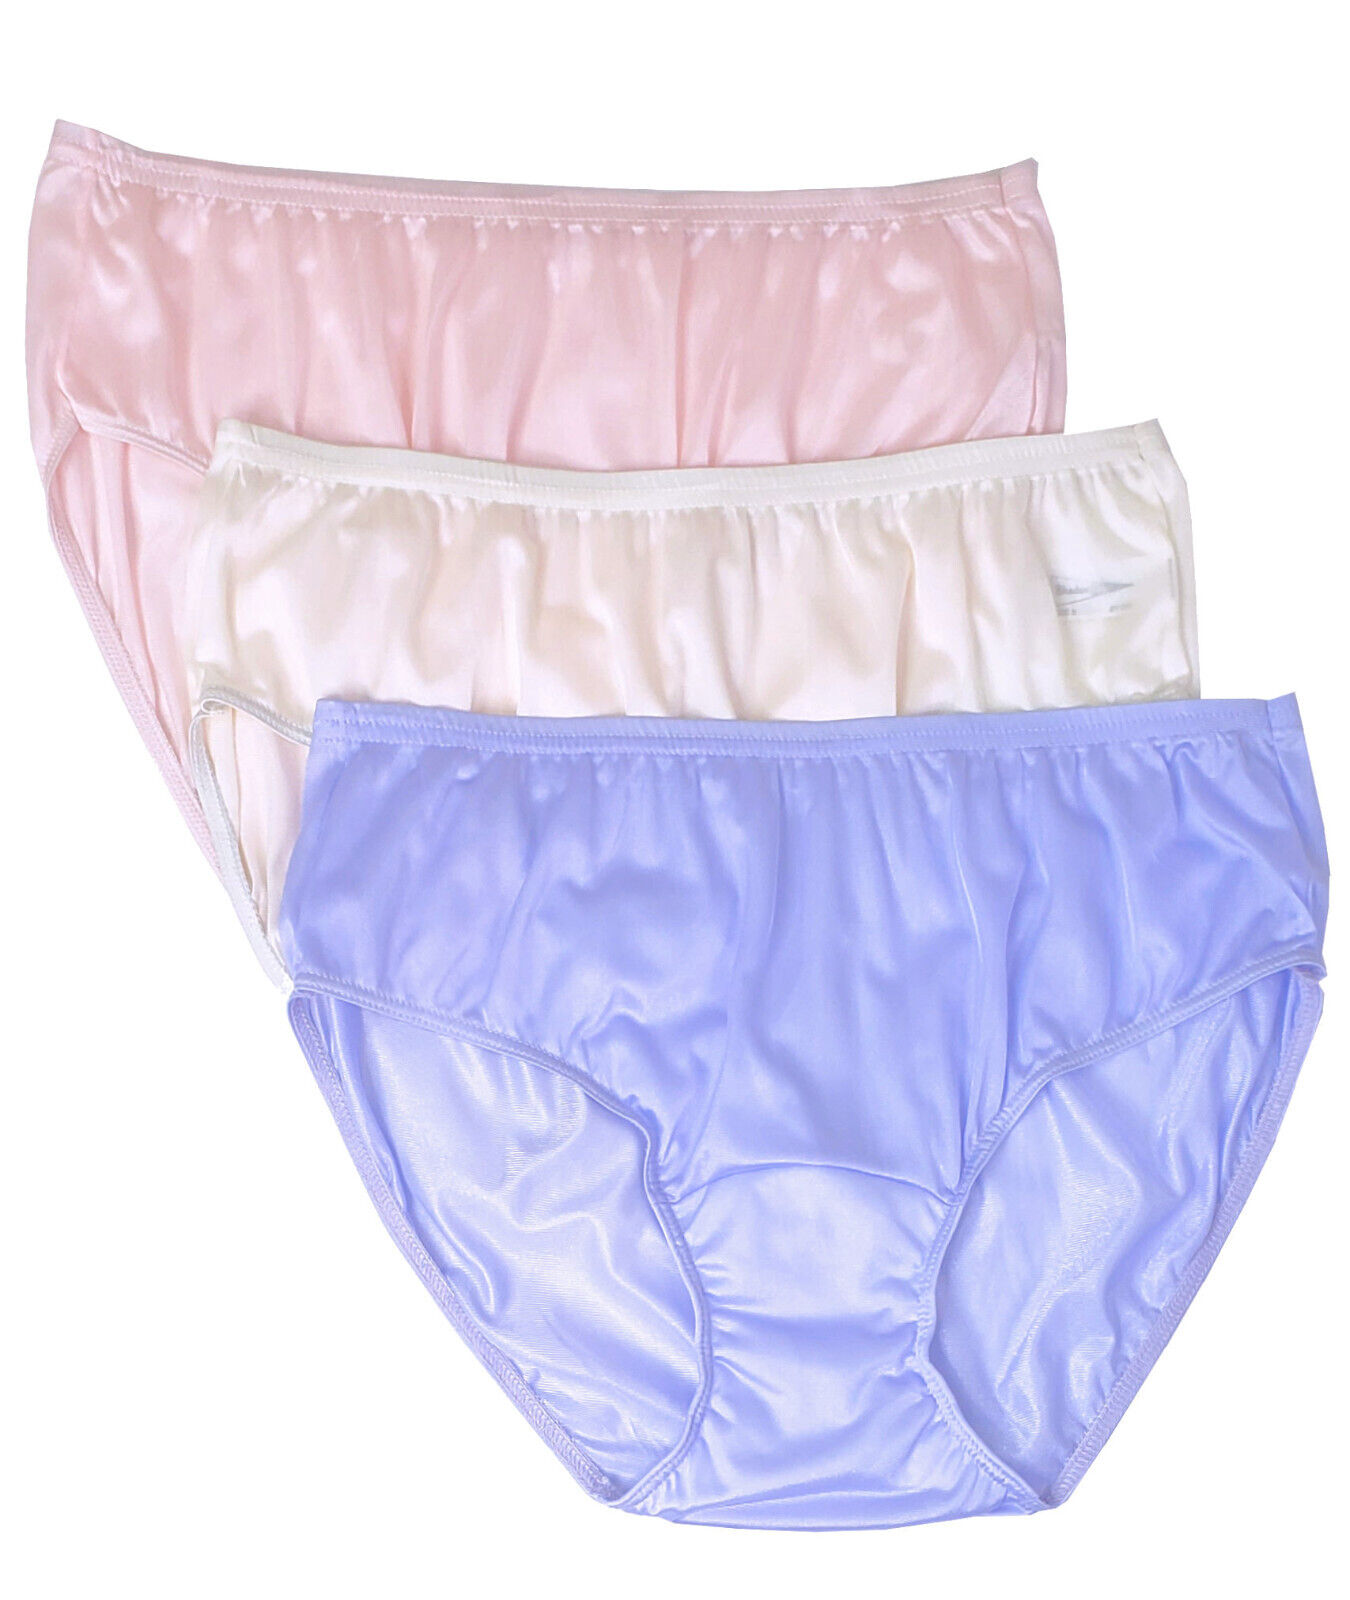 Shadowline Underwear Women's Panty Hipster Nylon 3 Pack Spring Colors Pink Ivory